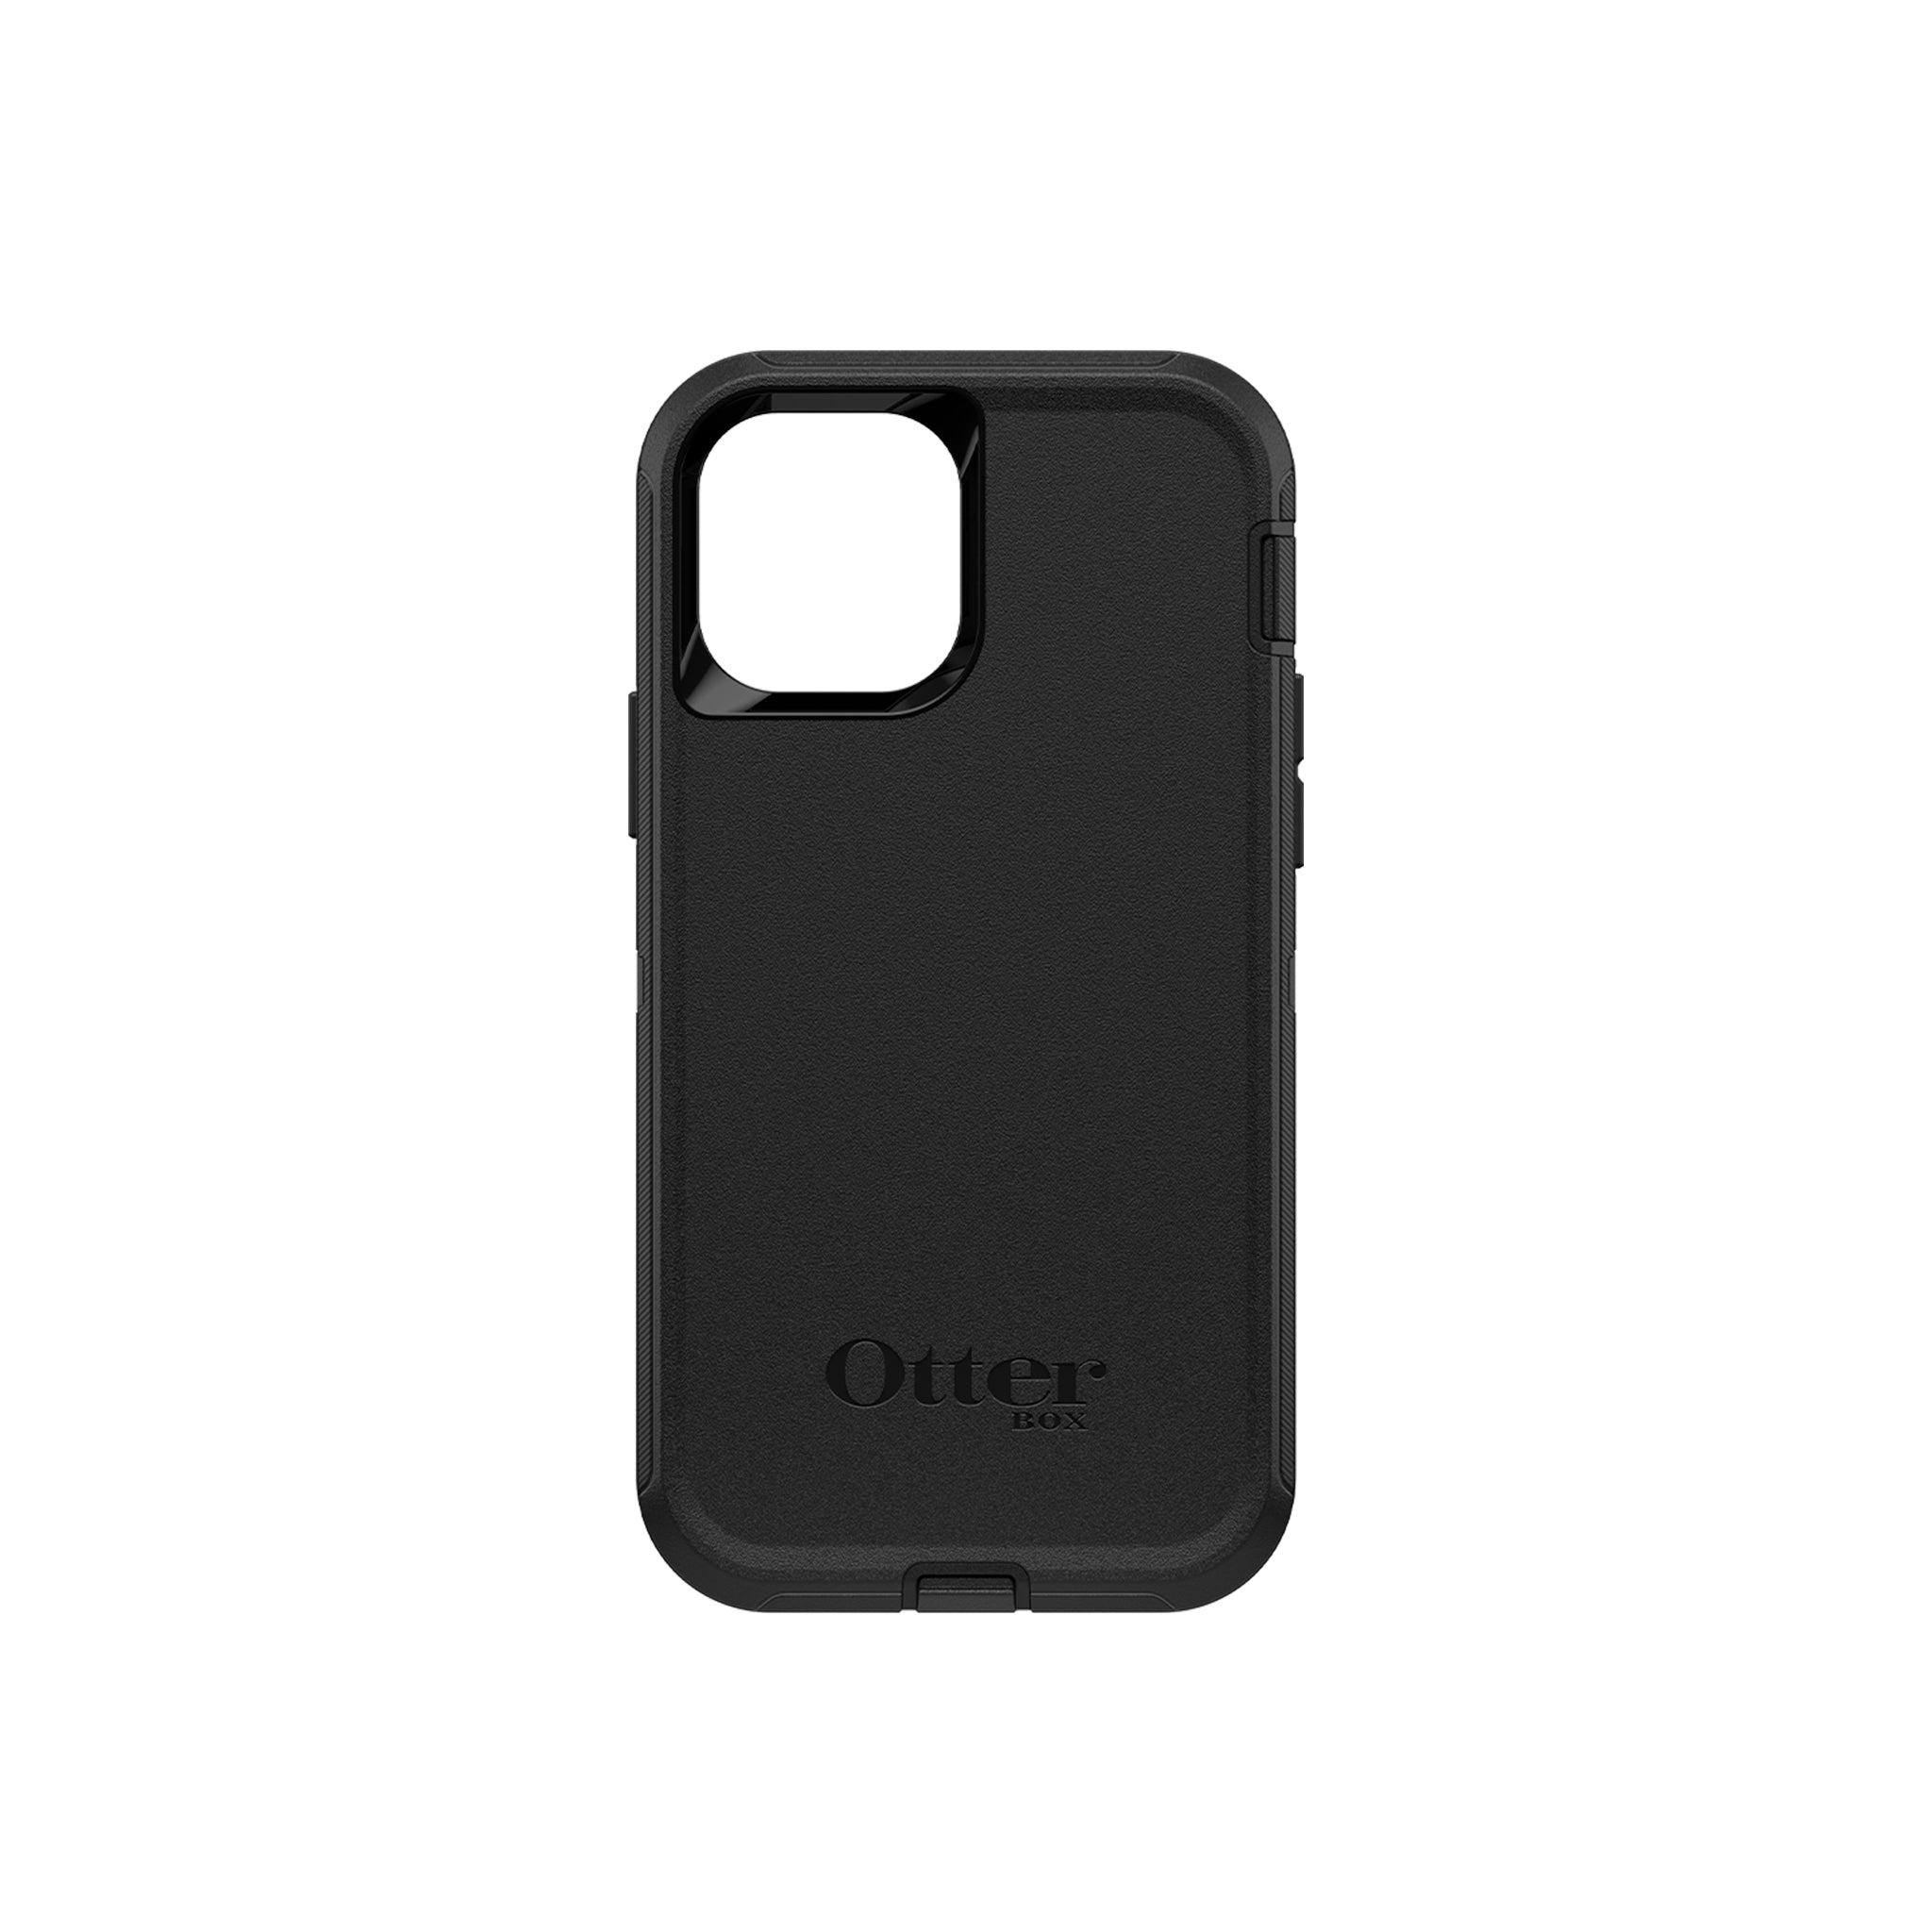 OtterBox - Defender for iPhone 12 / 12 Pro - Black